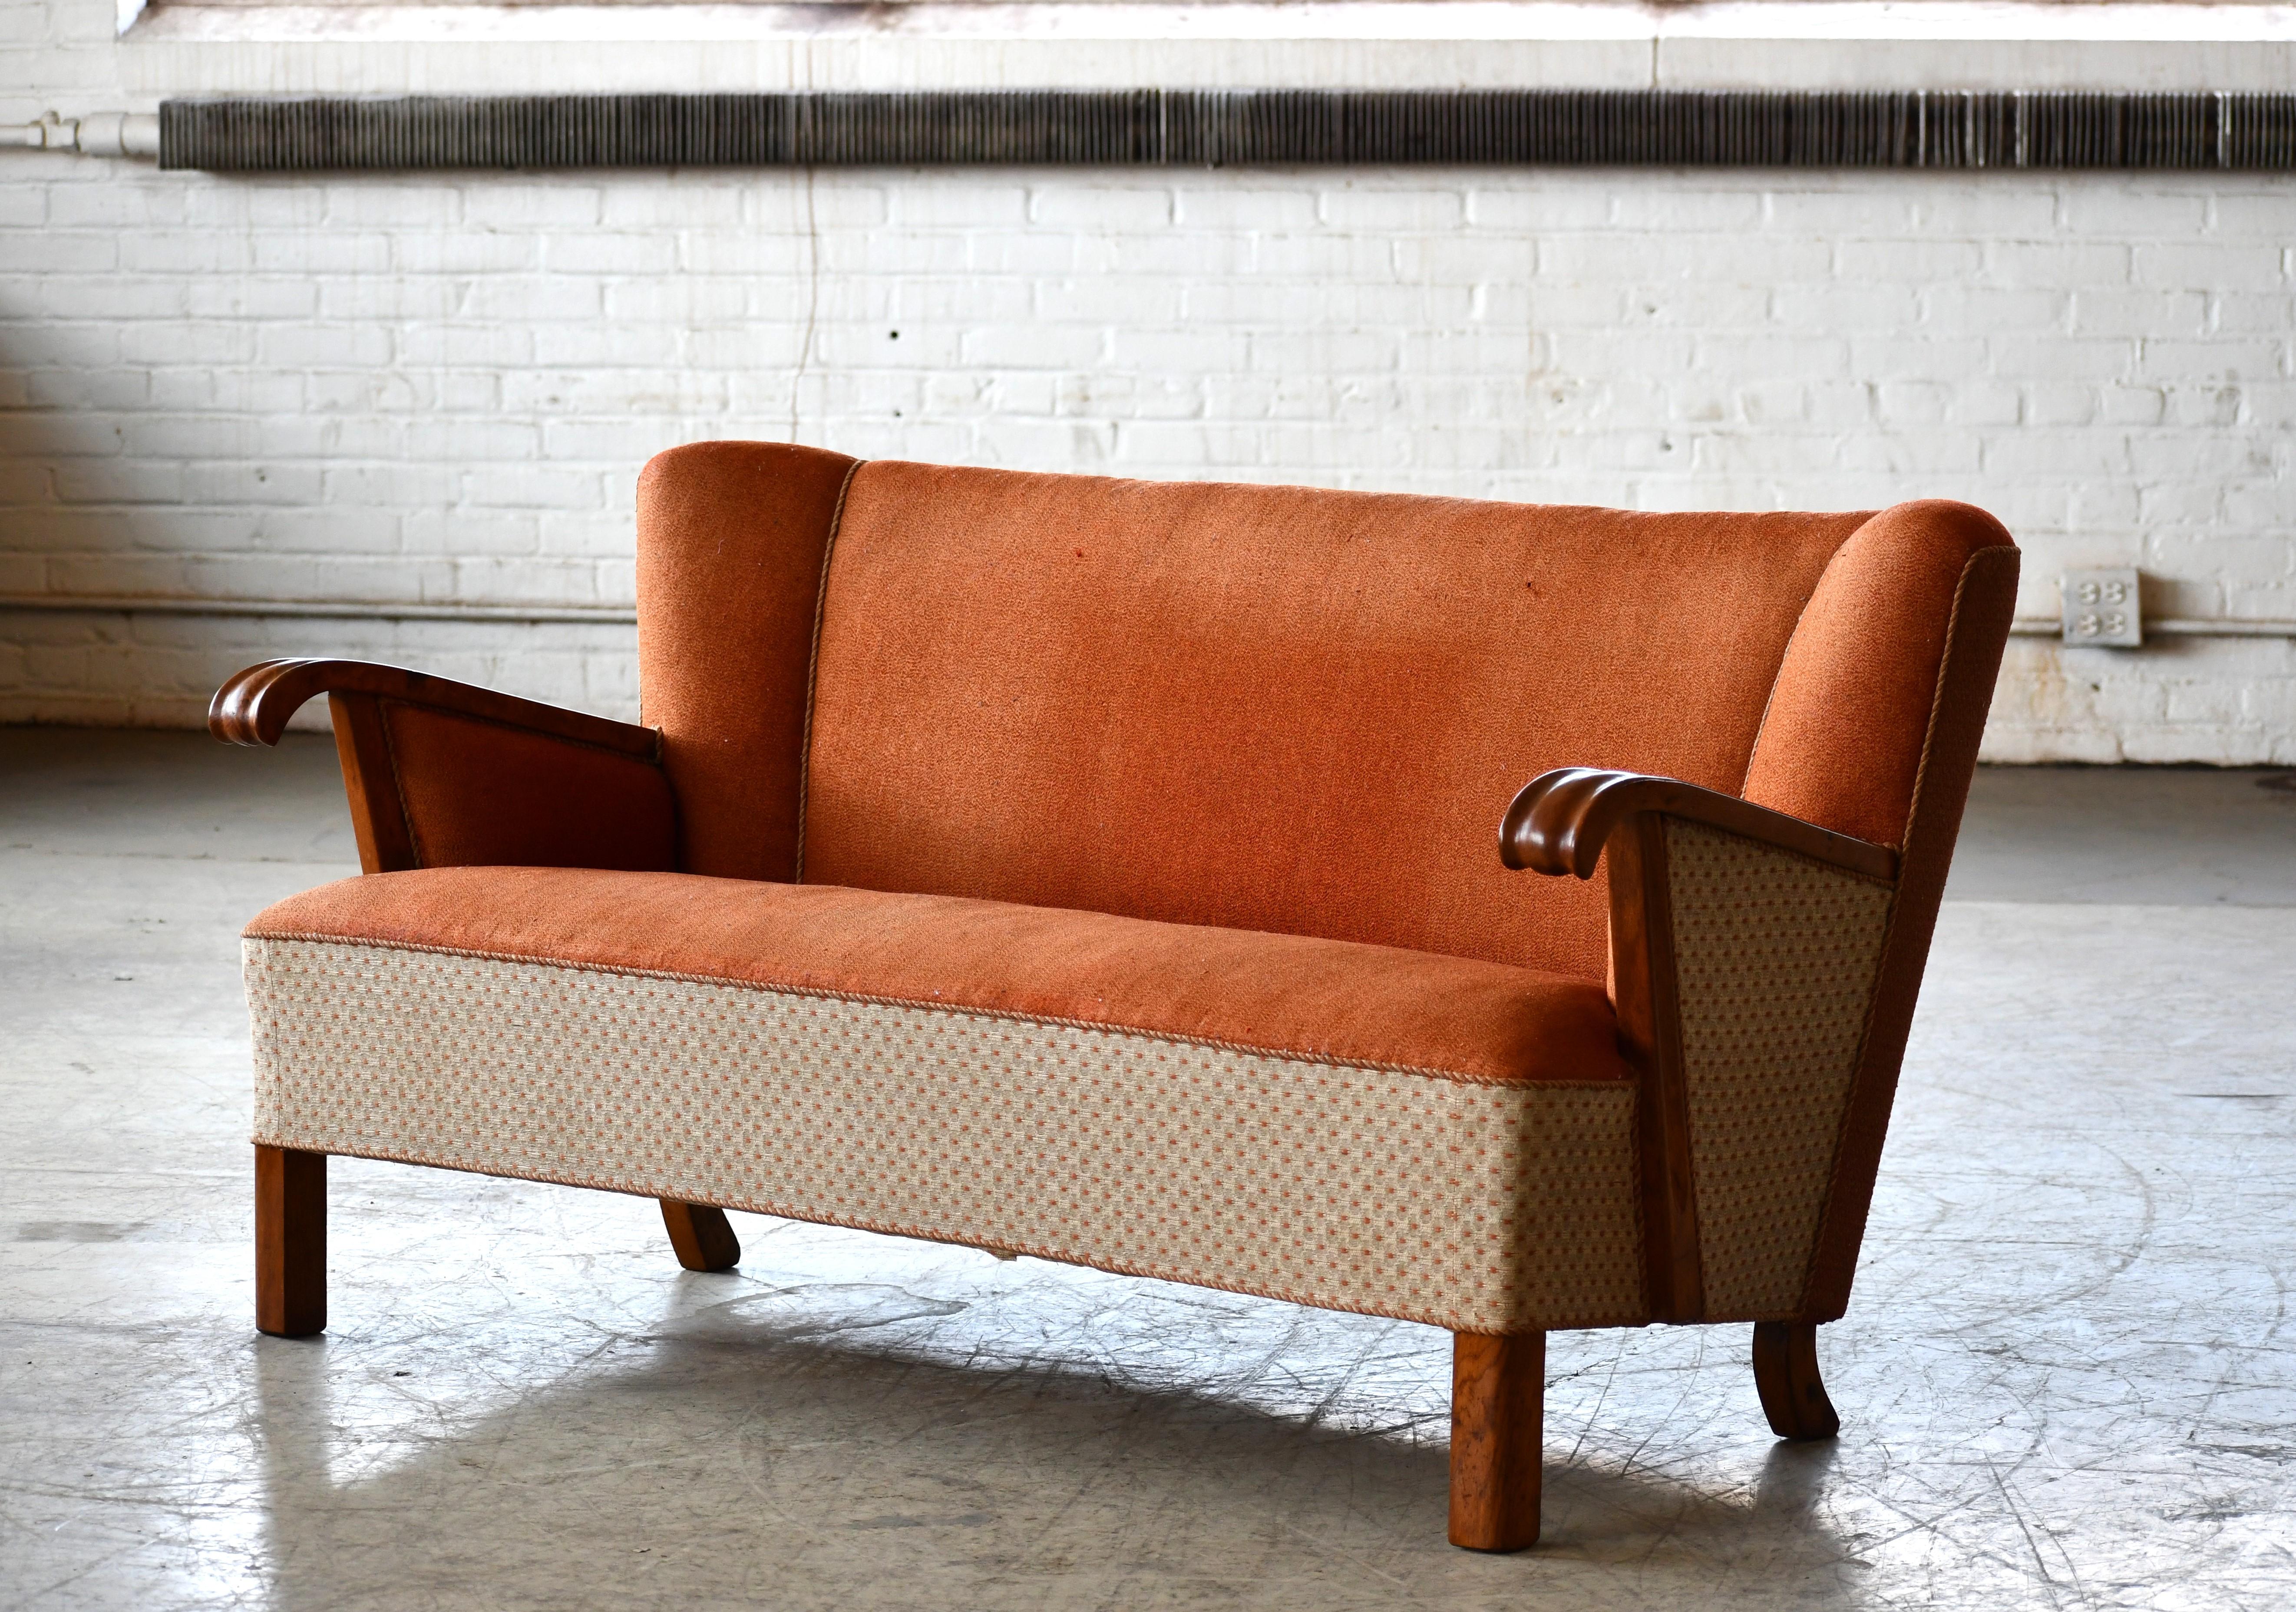 Mid-20th Century Danish Easy Settee with Oak Armrests, 1940s attributed to Slagelse Mobelvaerk